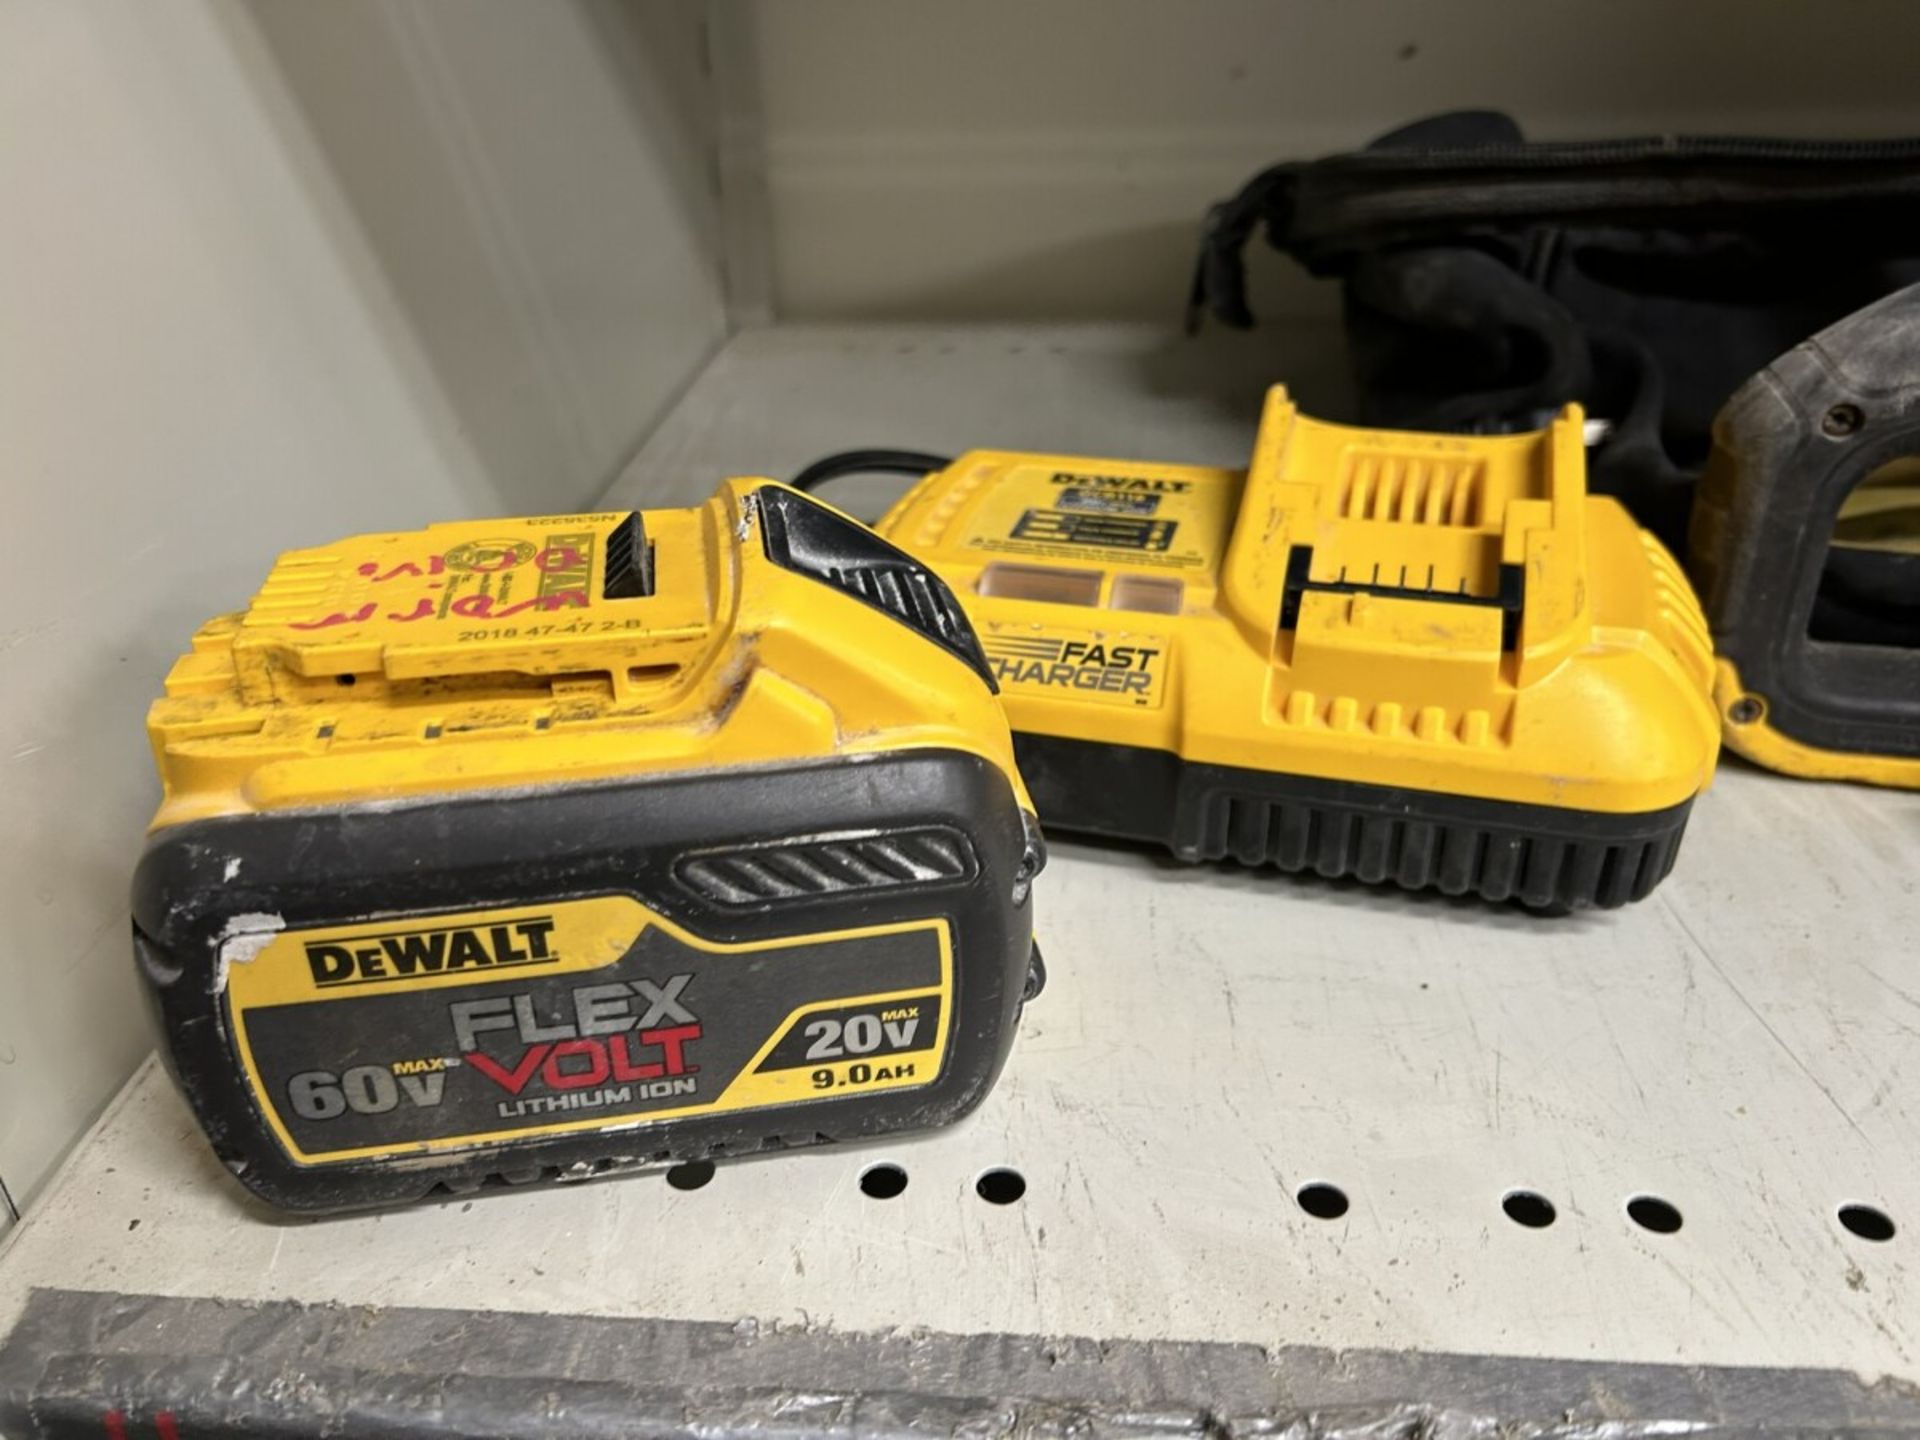 DEWALT CORDLESS 9" DEMOLITION SAW W/ 9.0AH BATTERY, CHARGER AND ASSORTED CUT OFF DISCS - Image 8 of 8